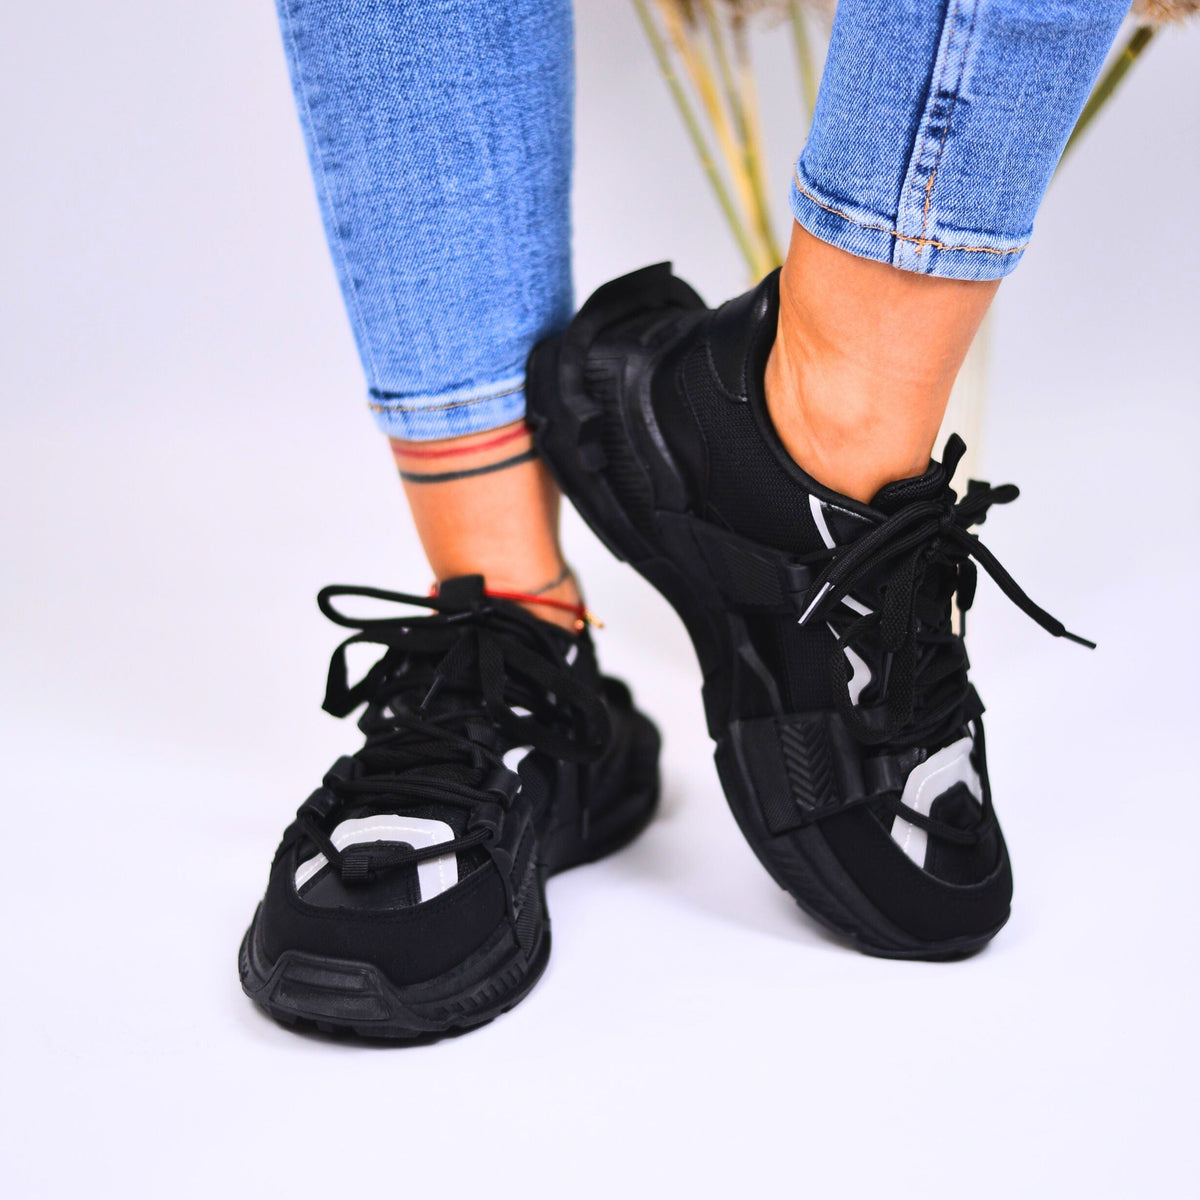 Women's Black Dolce Sneakers Made Of Ecological Leather And Textile Material